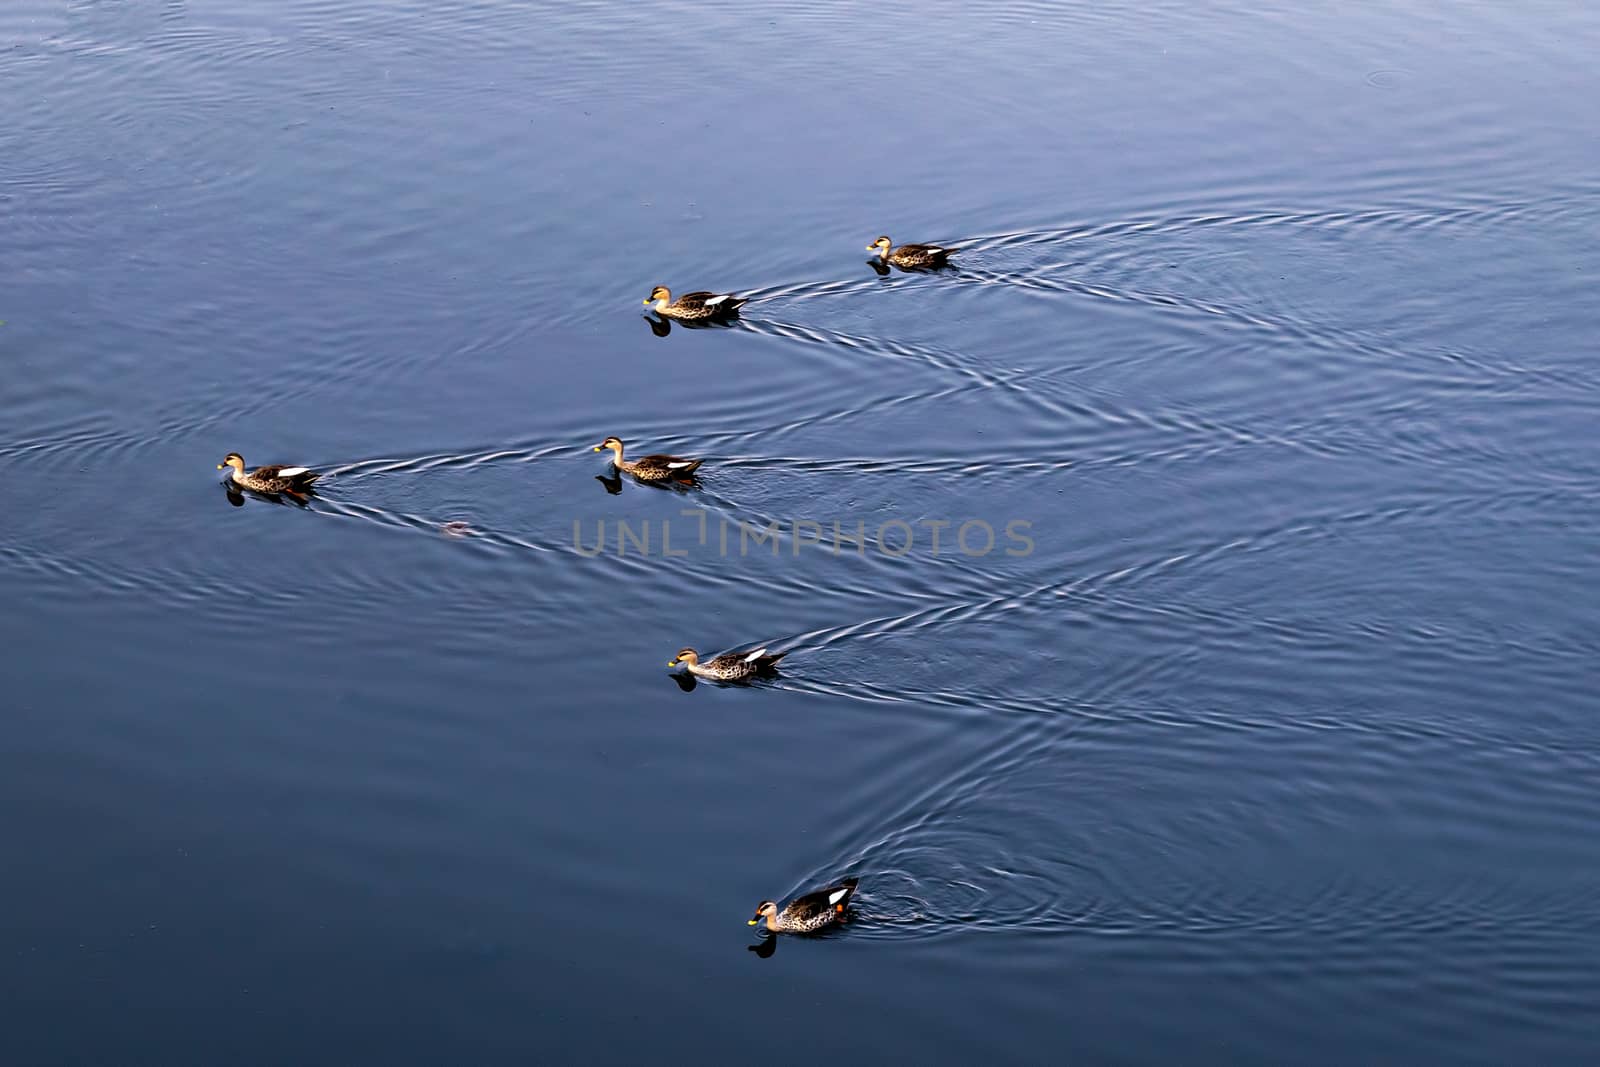 River ducks swimming in formation in clear blue water of Mula river in Pune, India.